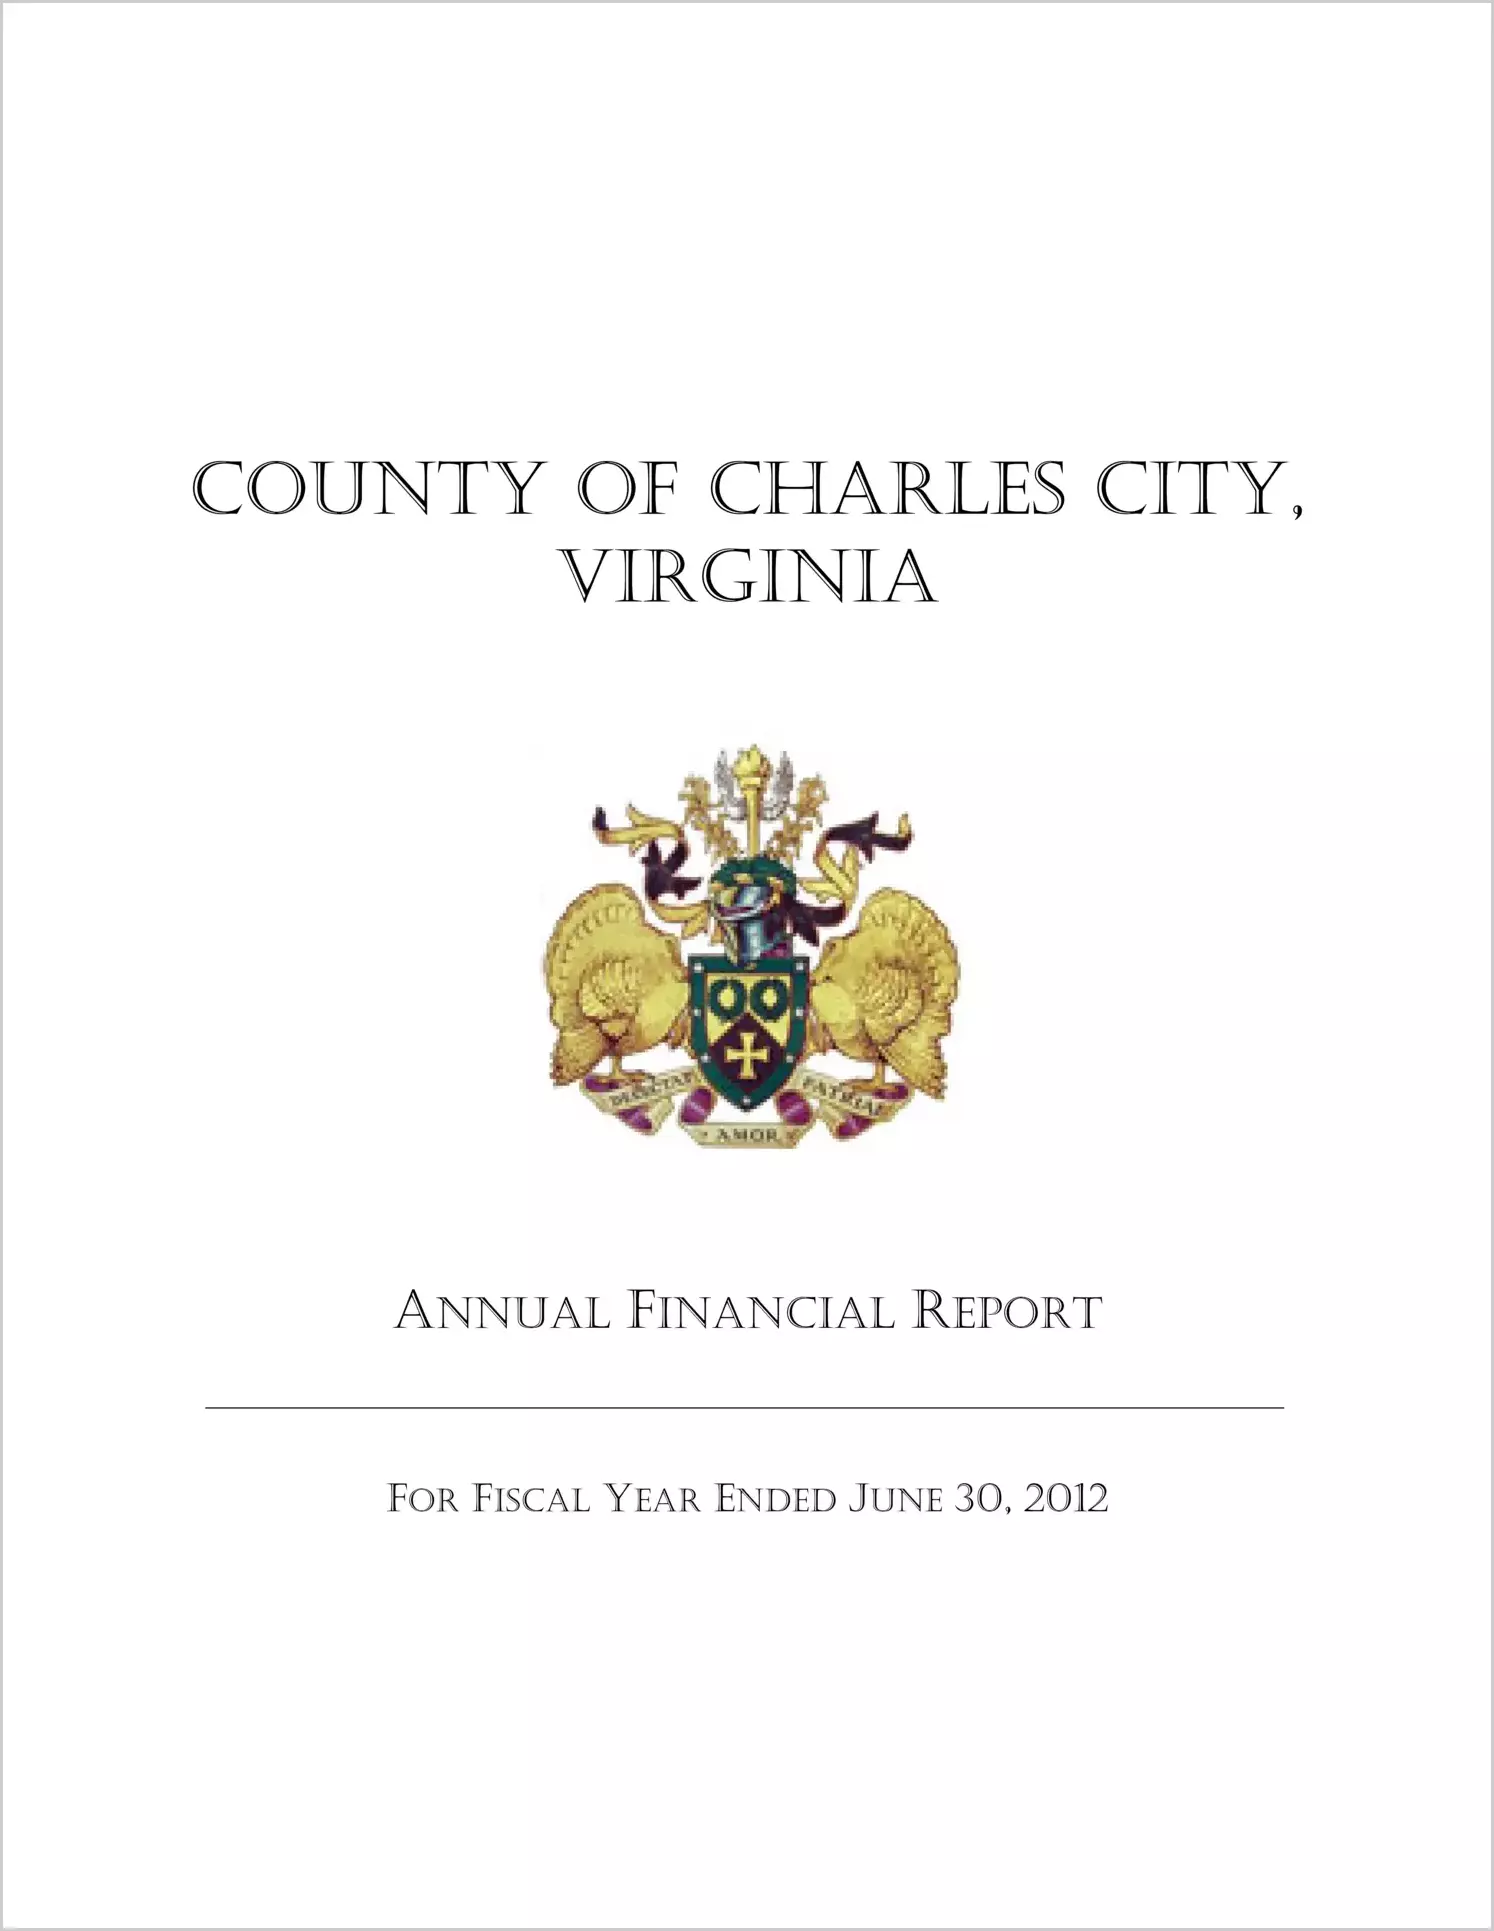 2012 Annual Financial Report for County of Charles City